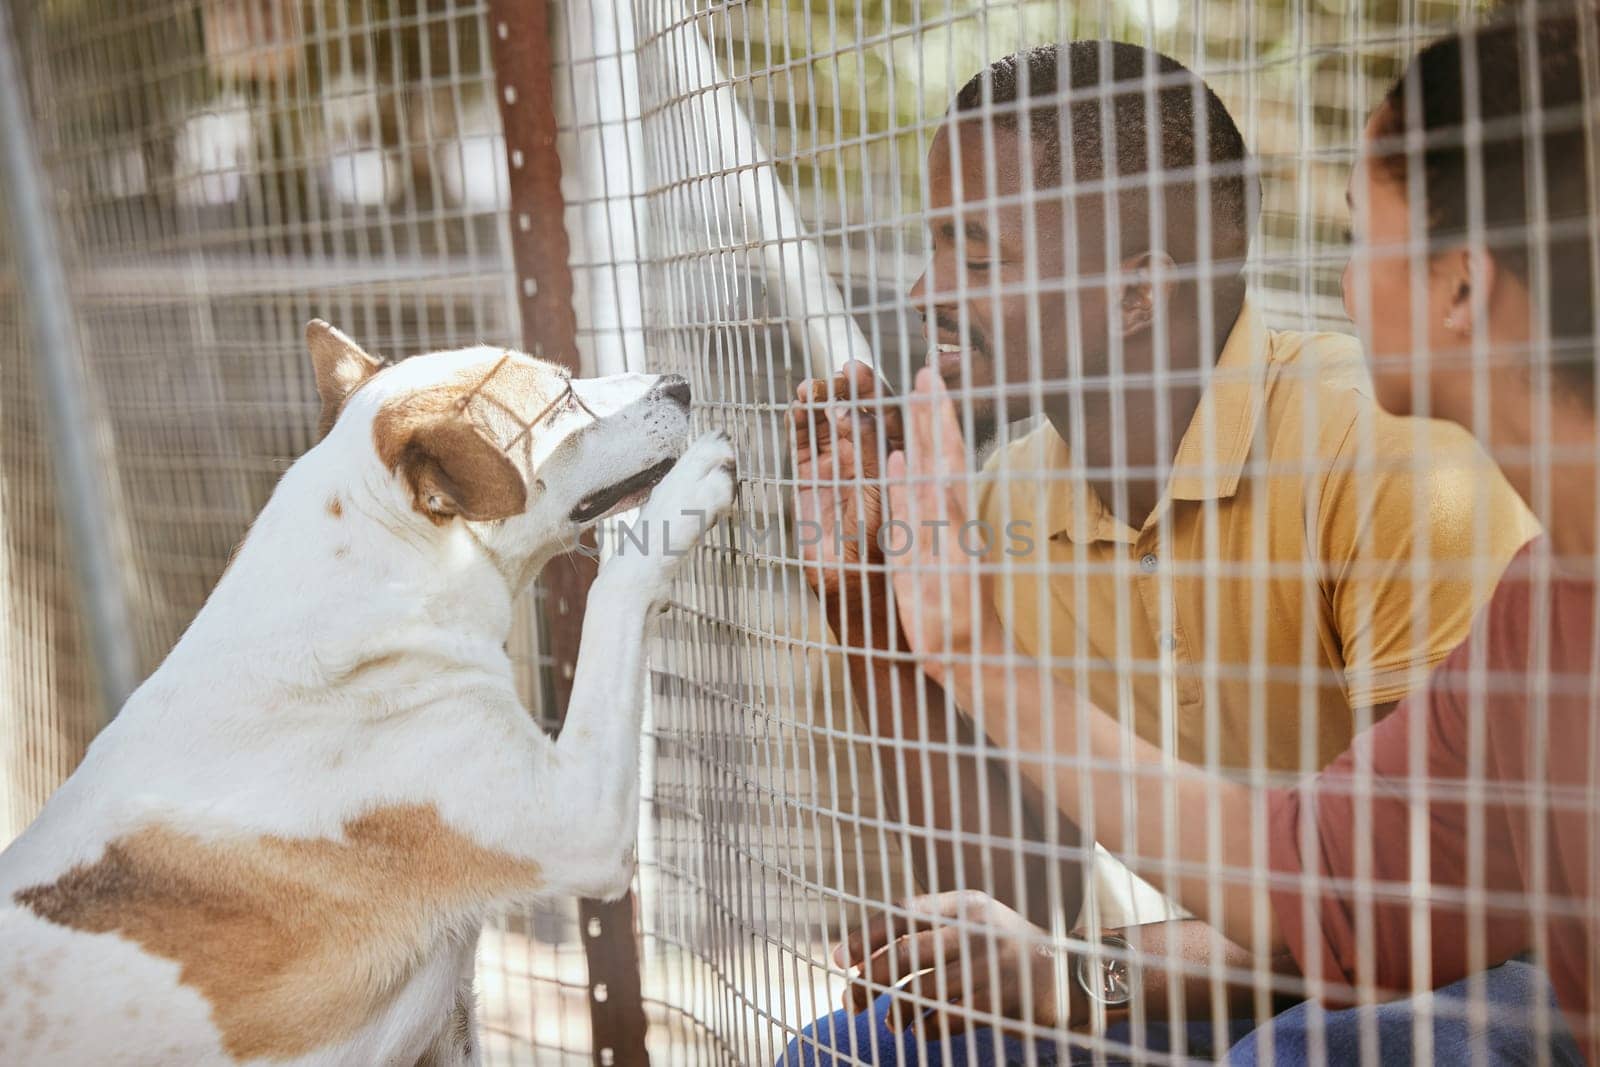 Fence, dog or couple with empathy at an adoption shelter or homeless center for dogs helping rescue animals. Love, hope or happy black people bonding with hands and paws with an excited puppy or pet.